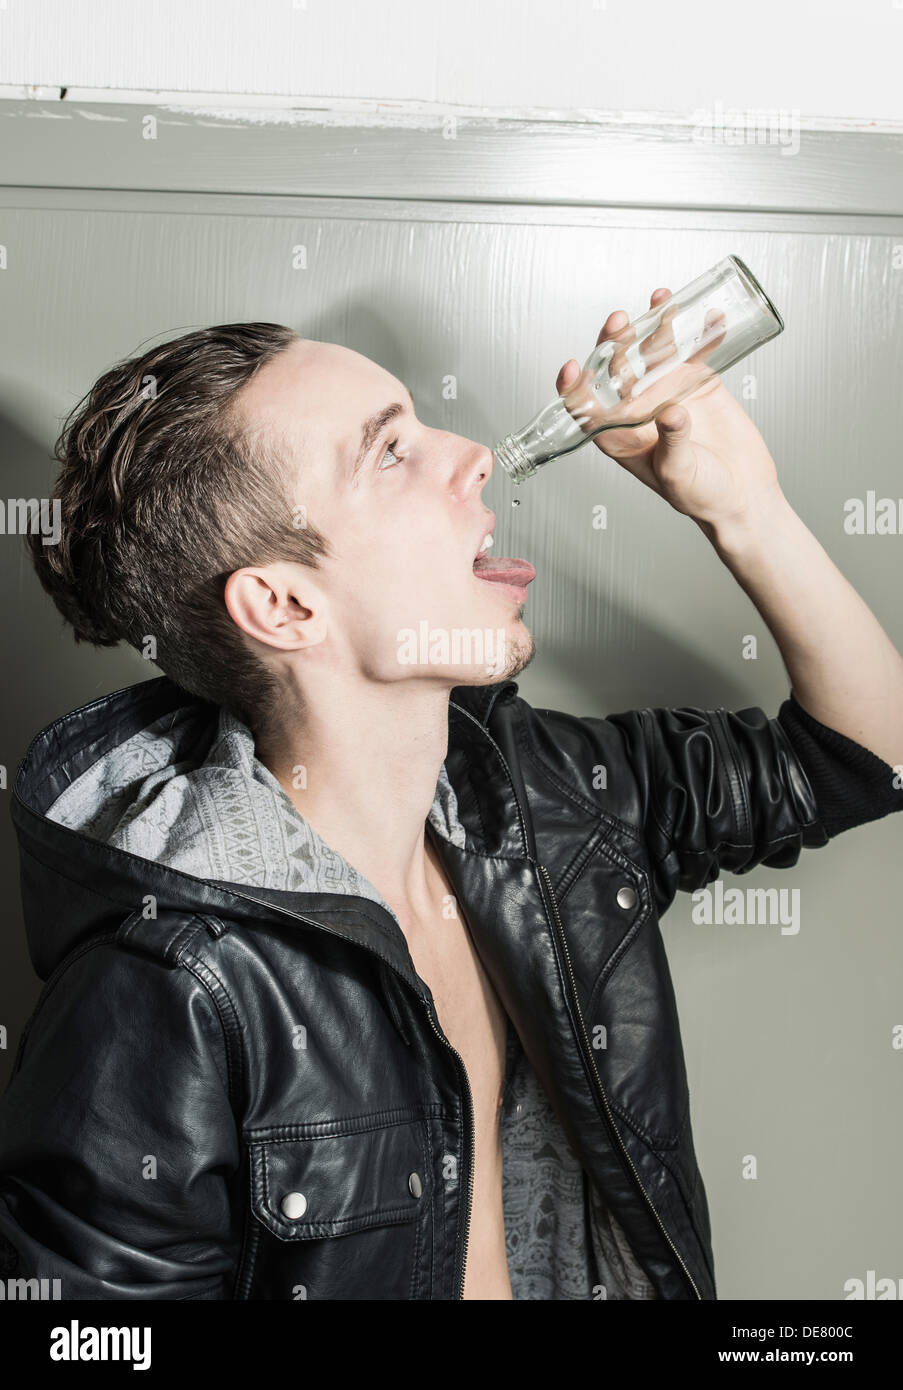 Profile portrait of a young man drinking the last drop from an empty bottle Stock Photo